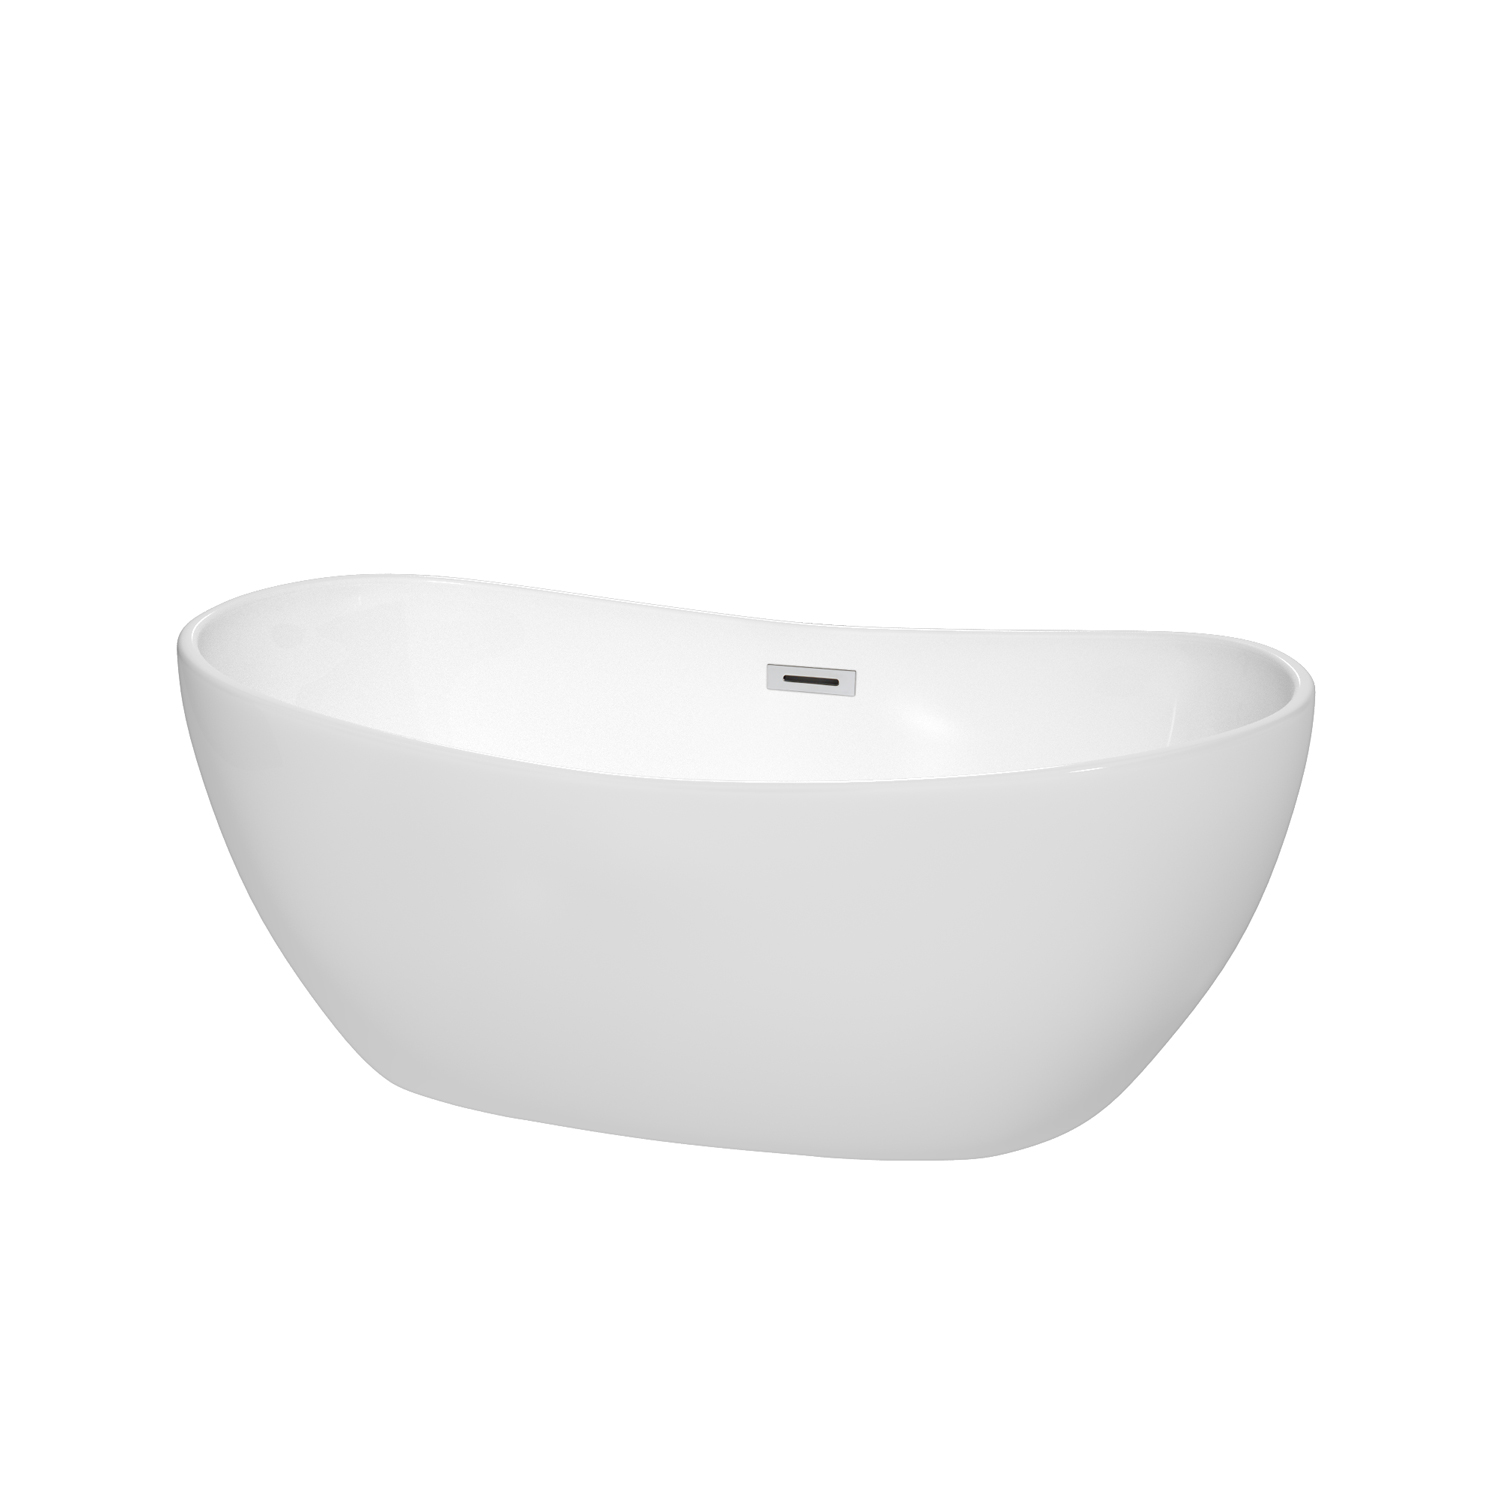 60" Freestanding Bathtub in White with Polished Chrome Drain and Overflow Trim with 2 Faucet Option